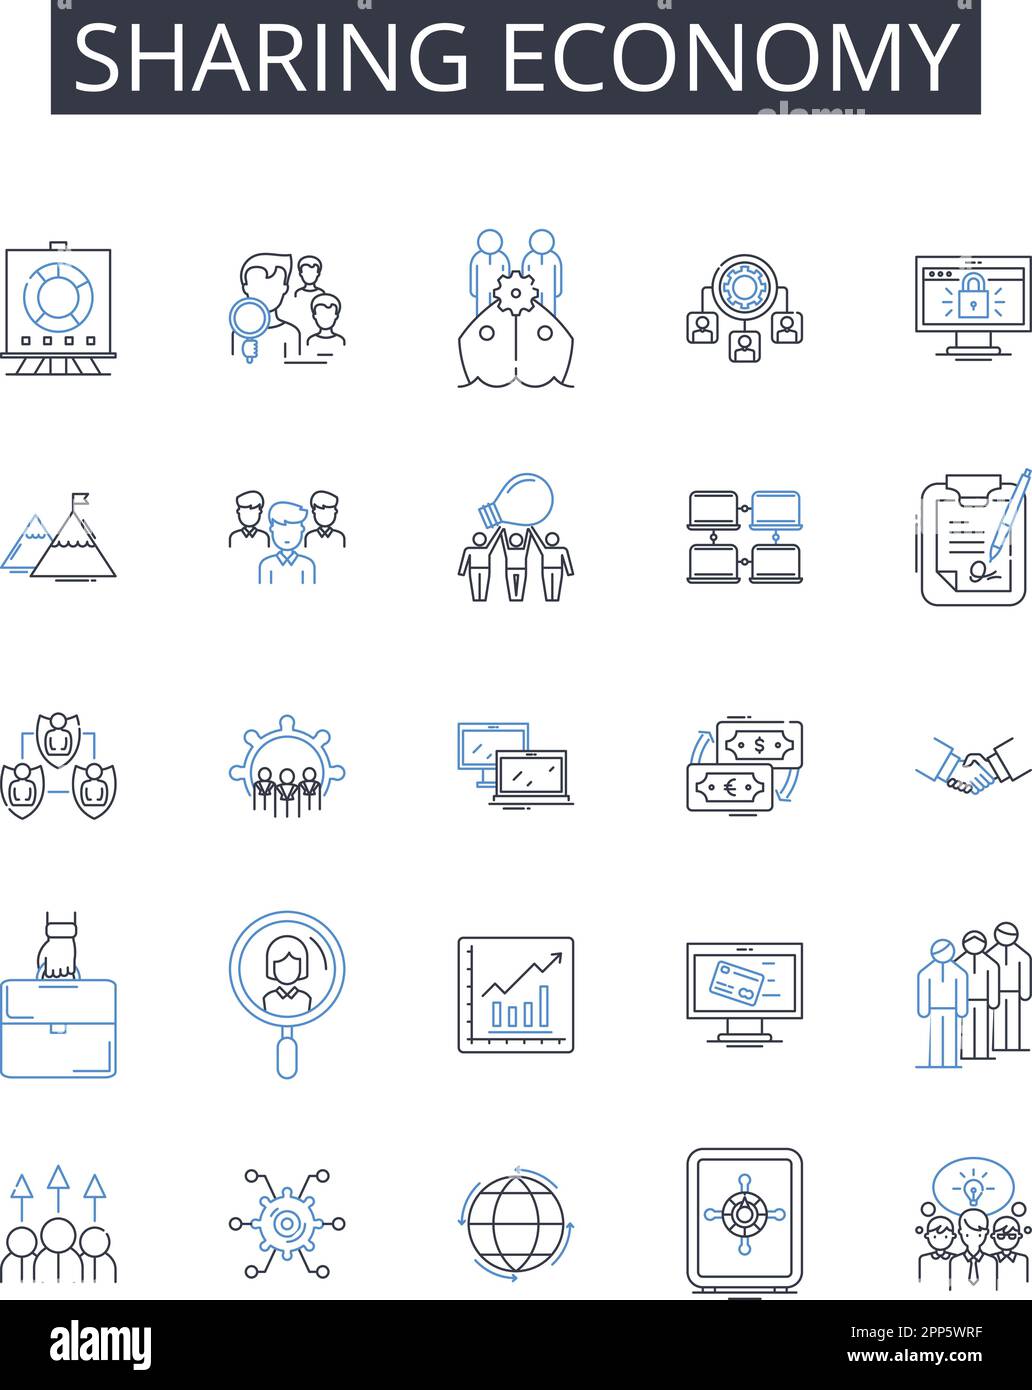 Sharing Economy line icons collection. Gig Economy, Collaborative Consumption, Peer-to-Peer, Social Business, Community Building, Co-creation, Co Stock Vector